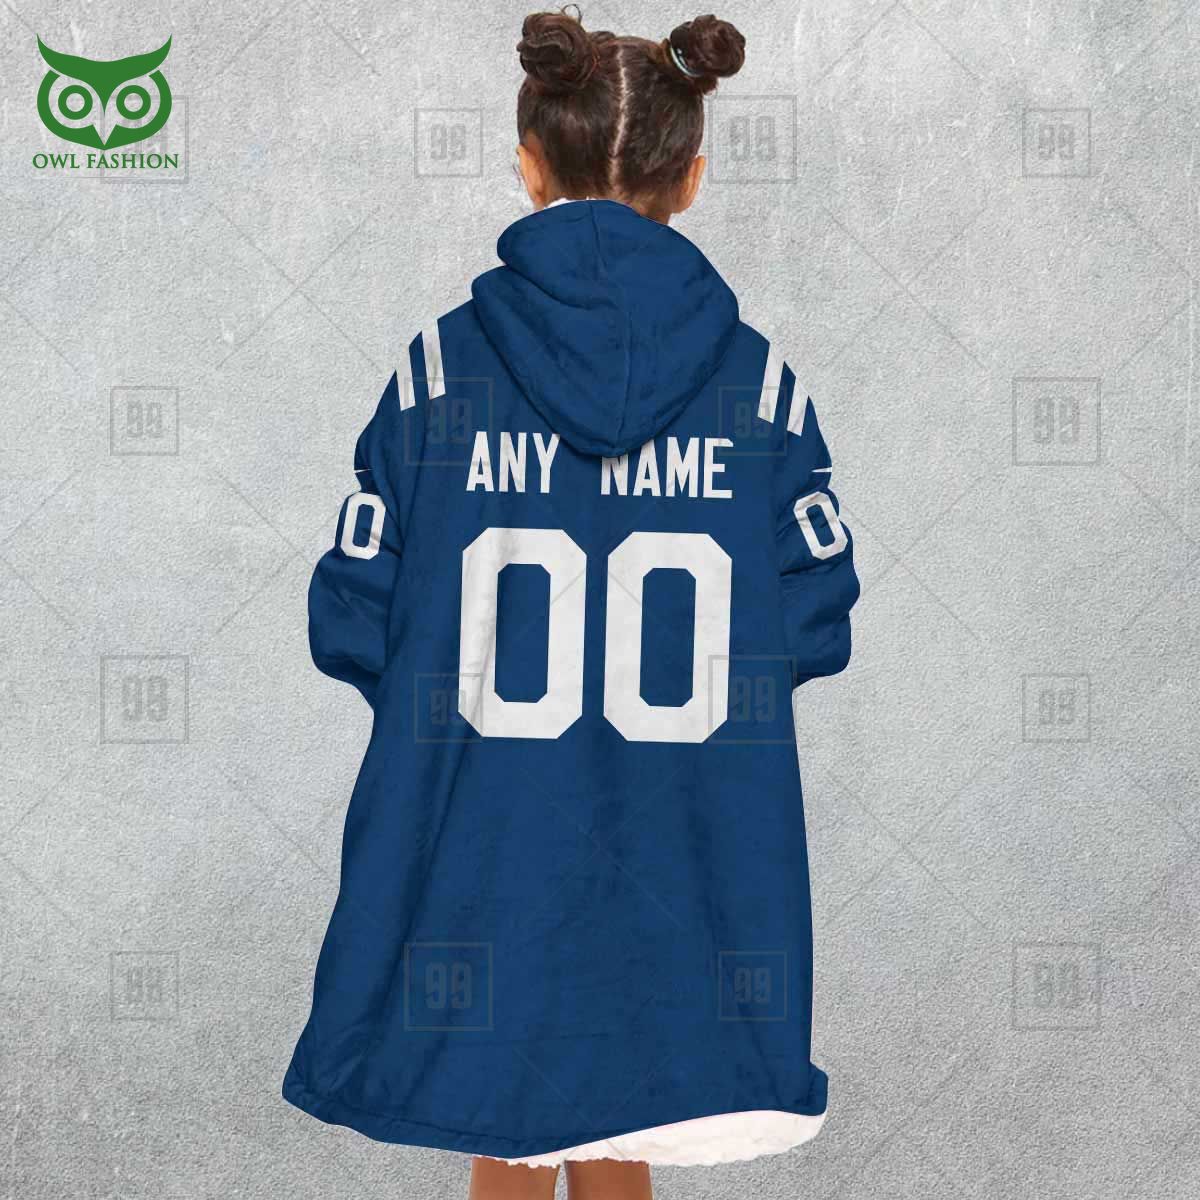 indianapolis colts american league nfl customized snuggie hoodie 5 xz0cF